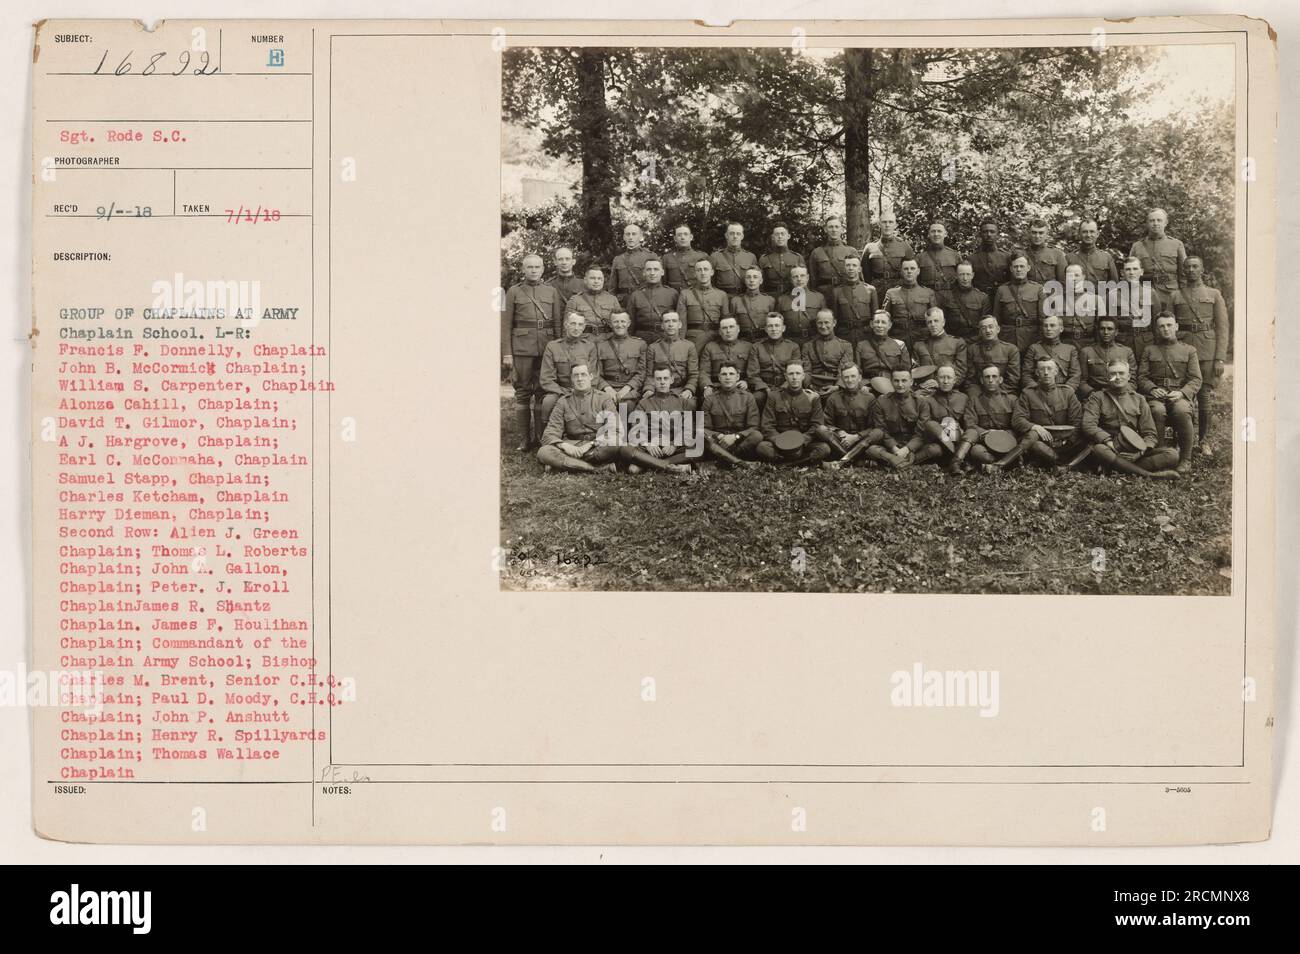 This photograph, numbered 111-SC-16892 SIL!ww1/war, features a group of chaplains at the Army Chaplain School during World War One. In the photo, from left to right in the front row, are Francis F. Donnelly, John B. McCormick, William S. Carpenter, Alonso Cahill, David T. Gilmor, A J. Hargrove, Earl C. McConnaha, Samuel Stapp, Charles Ketcham, and Harry Dieman. In the second row, there are Allen J. Green, Thomas L. Roberts, John A. Gallon, Peter J. Eroll, James R. Shantz, James P. Houlihan, Commandant of the Chaplain Army School, Bishop Charles M. Brent, Paul D. Moody, John P. Anshutt, Henry R Stock Photo